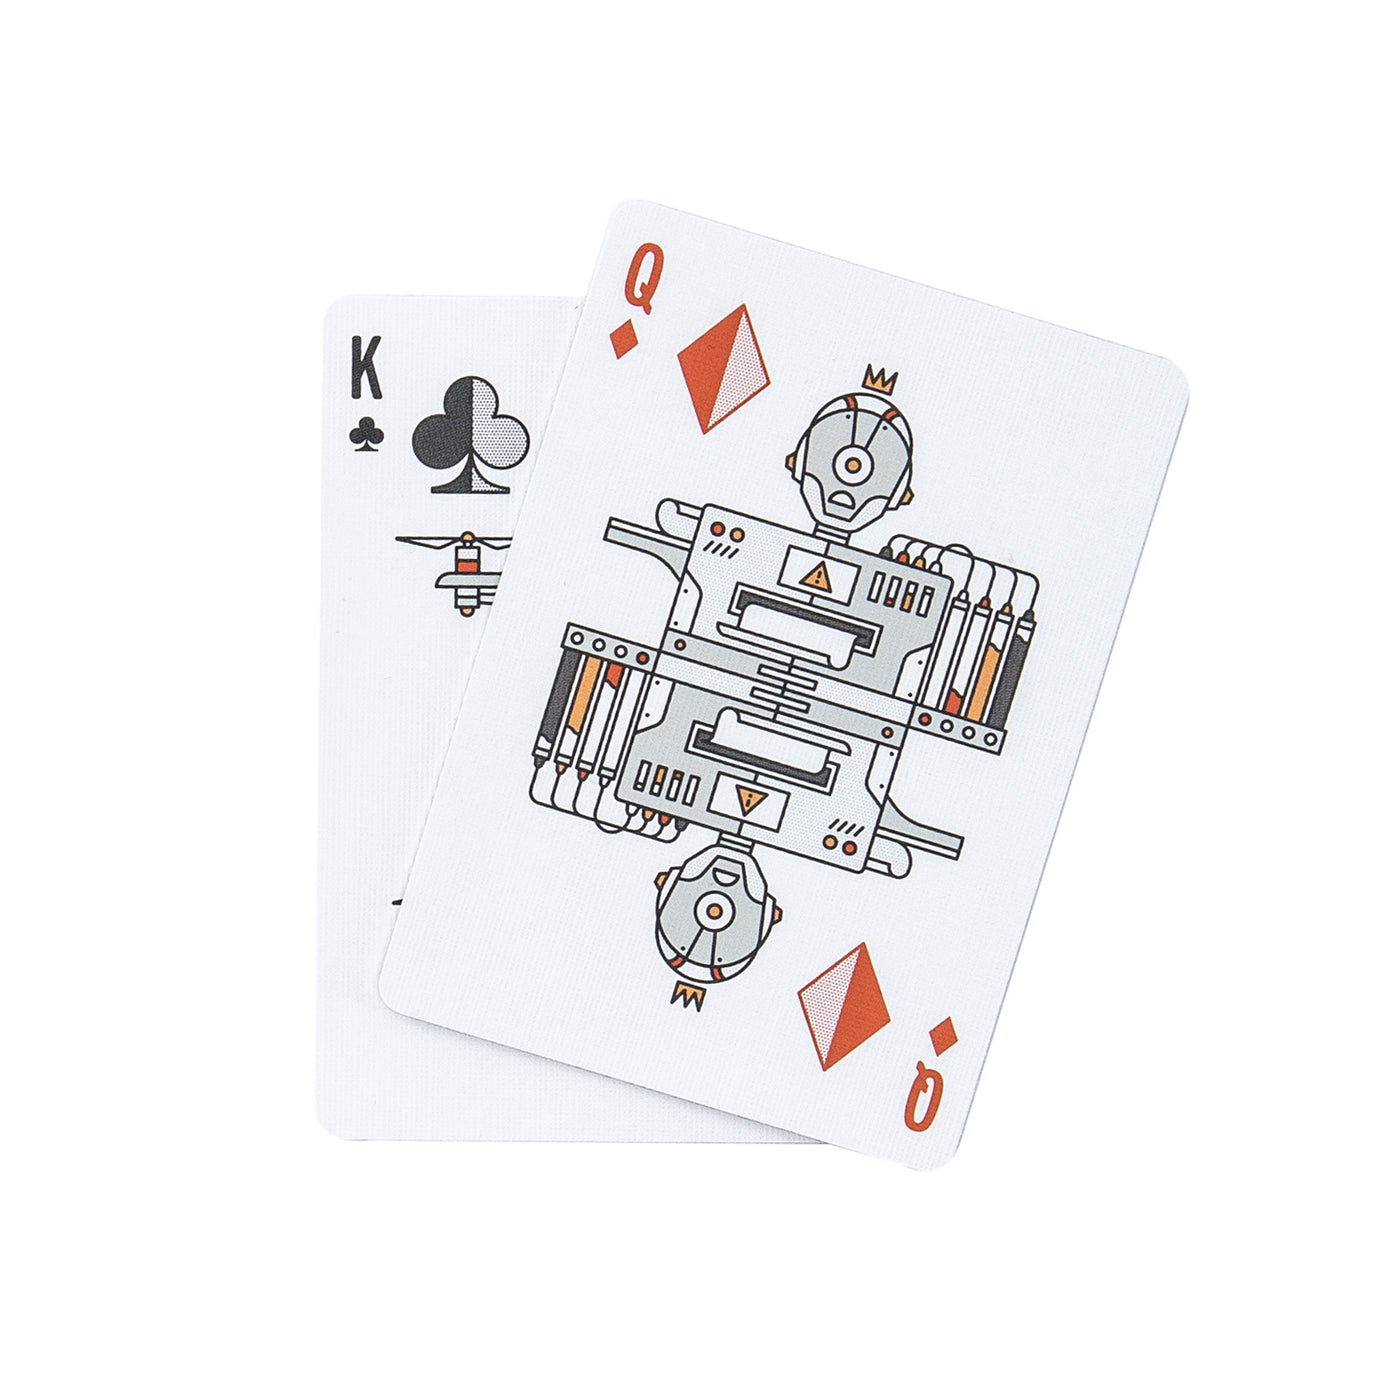 King and Queen Cards from Deck of Robots Playing Card Deck